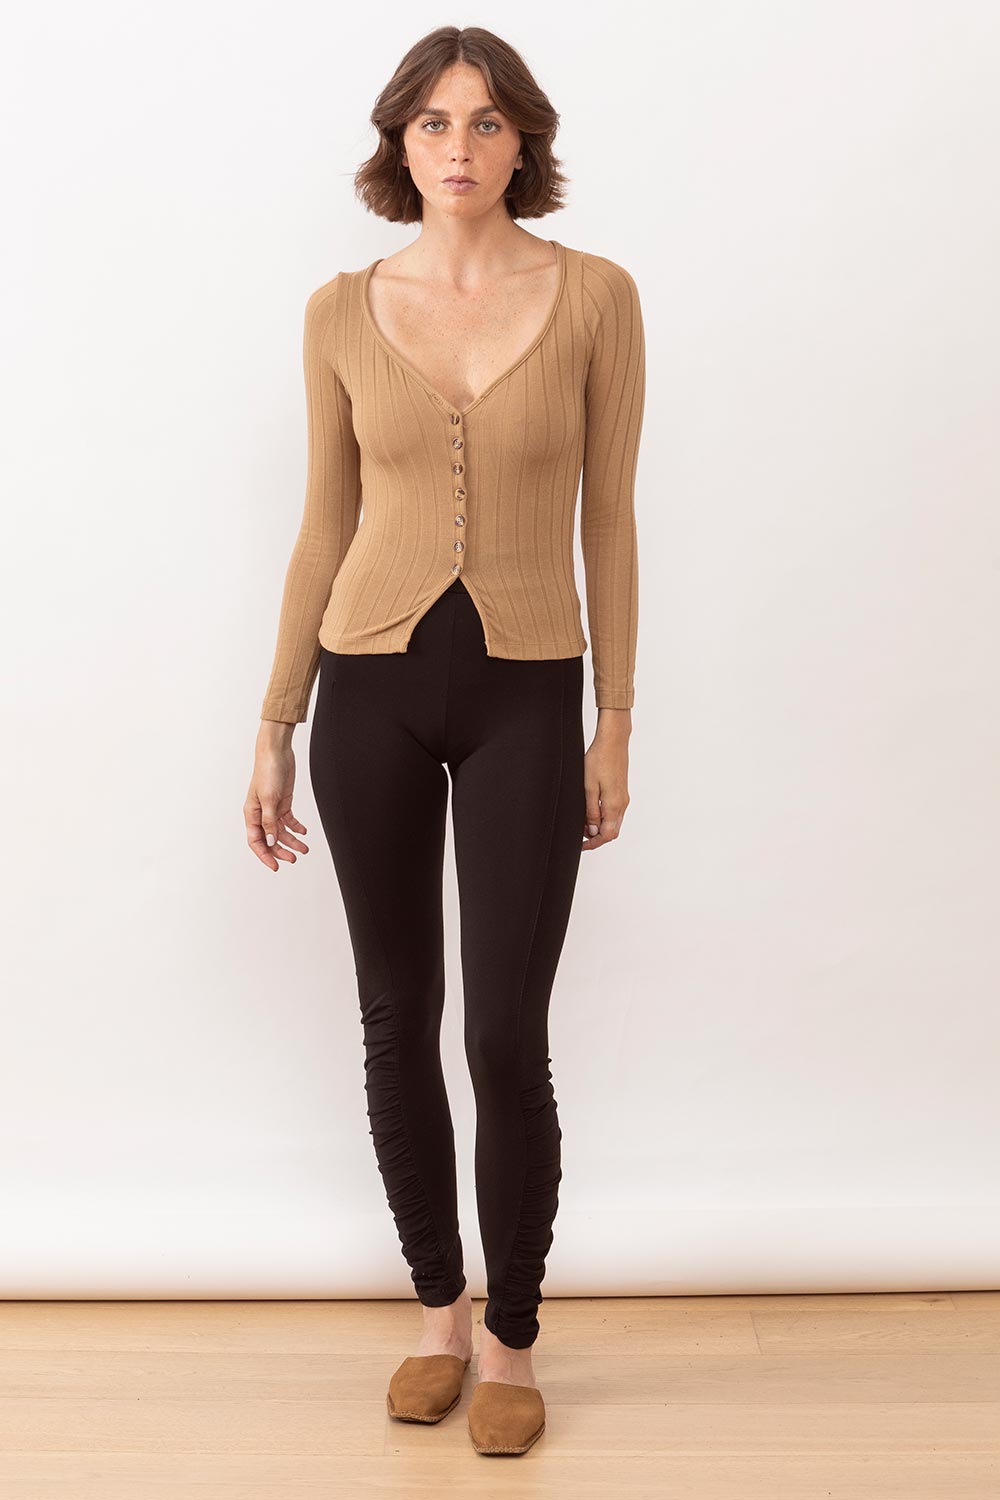 Passion Camel Top